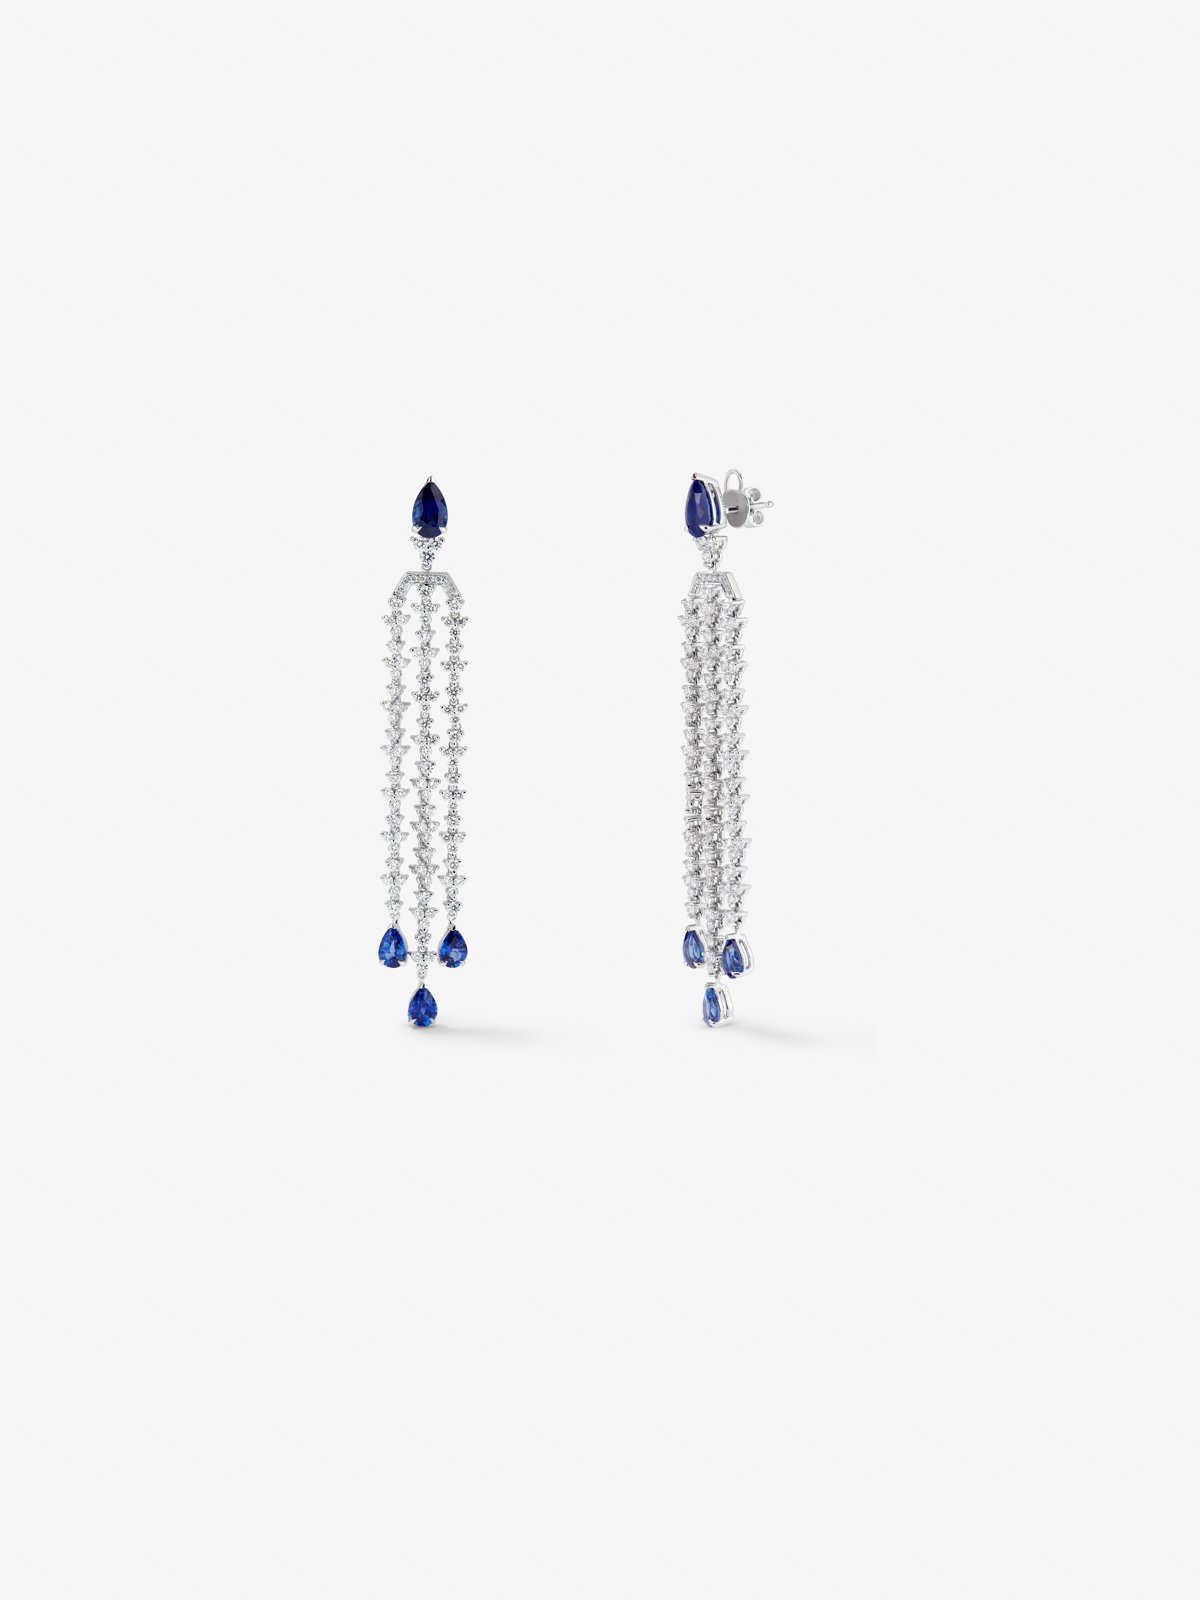 18K white gold earrings with Royal blue sapps in 5.61 cts and white diamonds in bright 3.44 cts diamonds